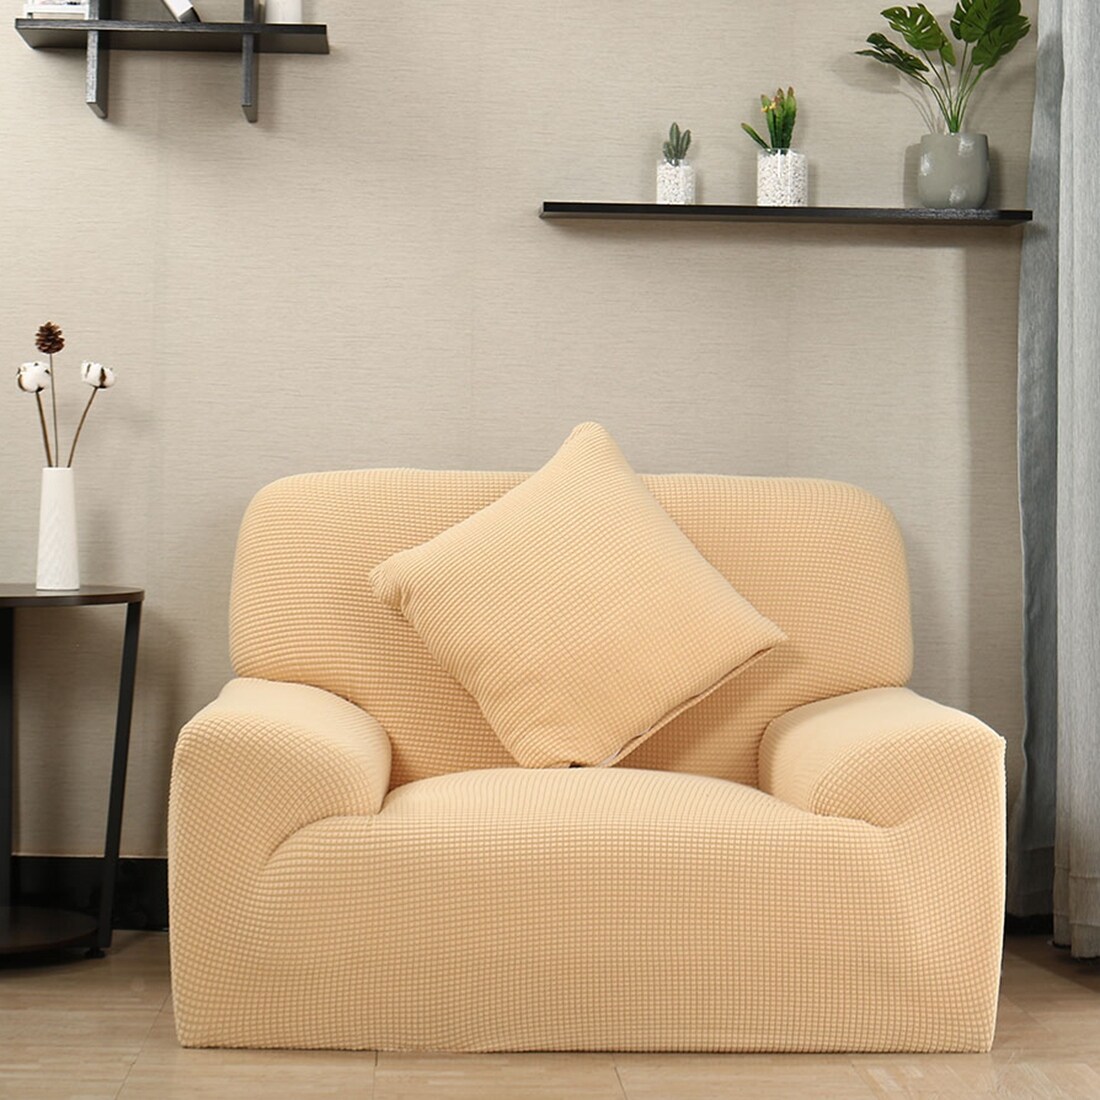 Plush Fabric Sofa Cover 1/2/3/4 Seater Thick Slipcover Couch Sofa Covers Stretch Elastic Sofa Covers Towel wrap Covering,Beige,1 Seat 90-140cm